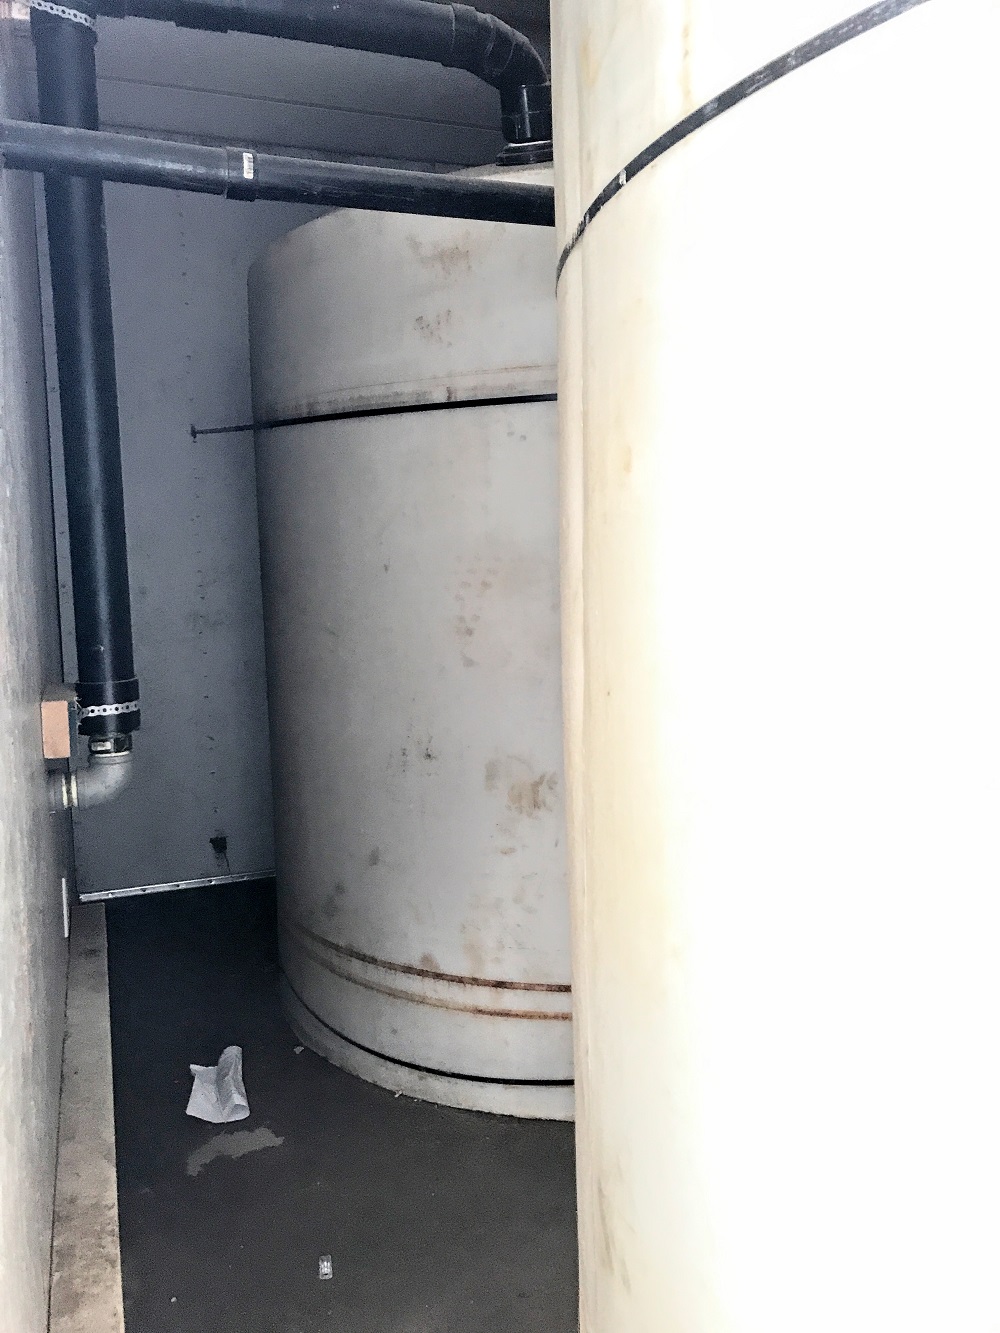 Used mobile water storage building for sale in Edmonton Ab MDS-154418-1